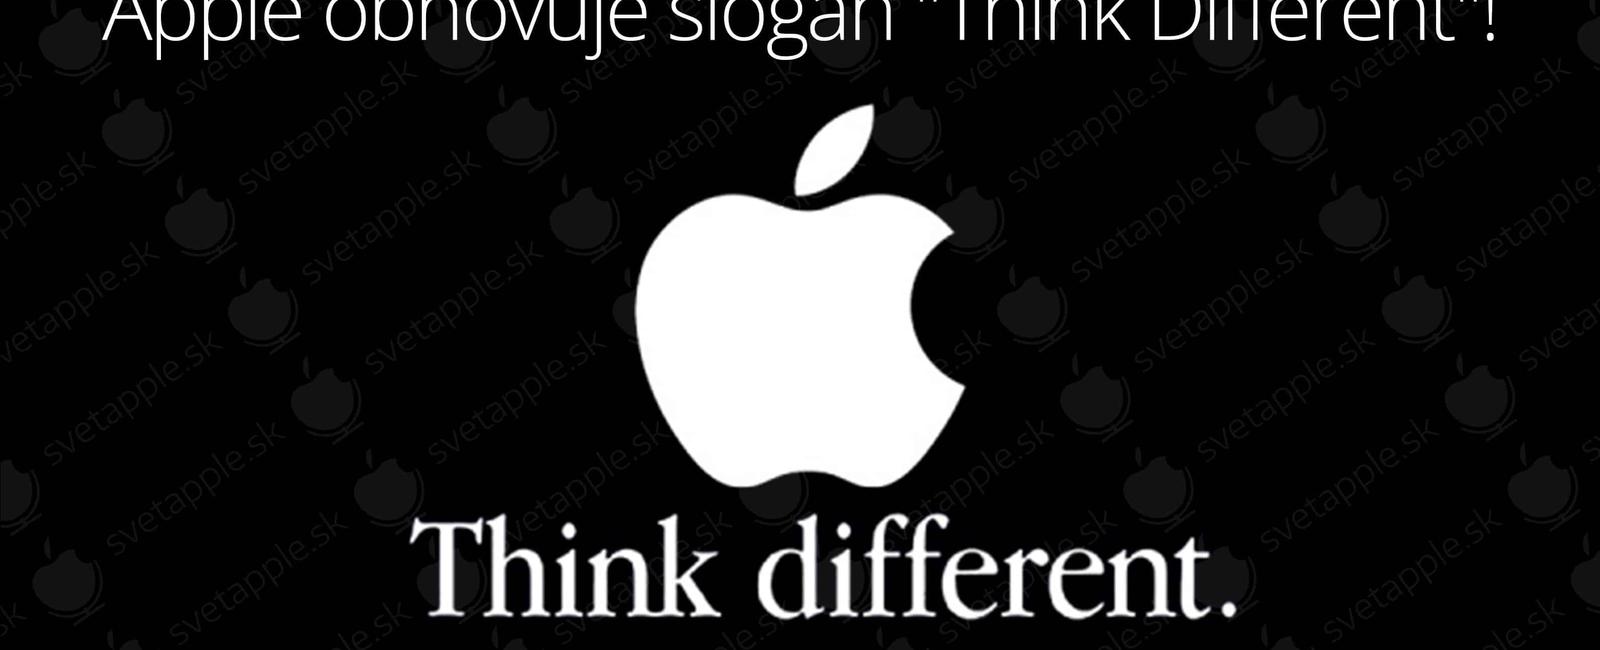 Ibm s motto is think apple later made their motto think different